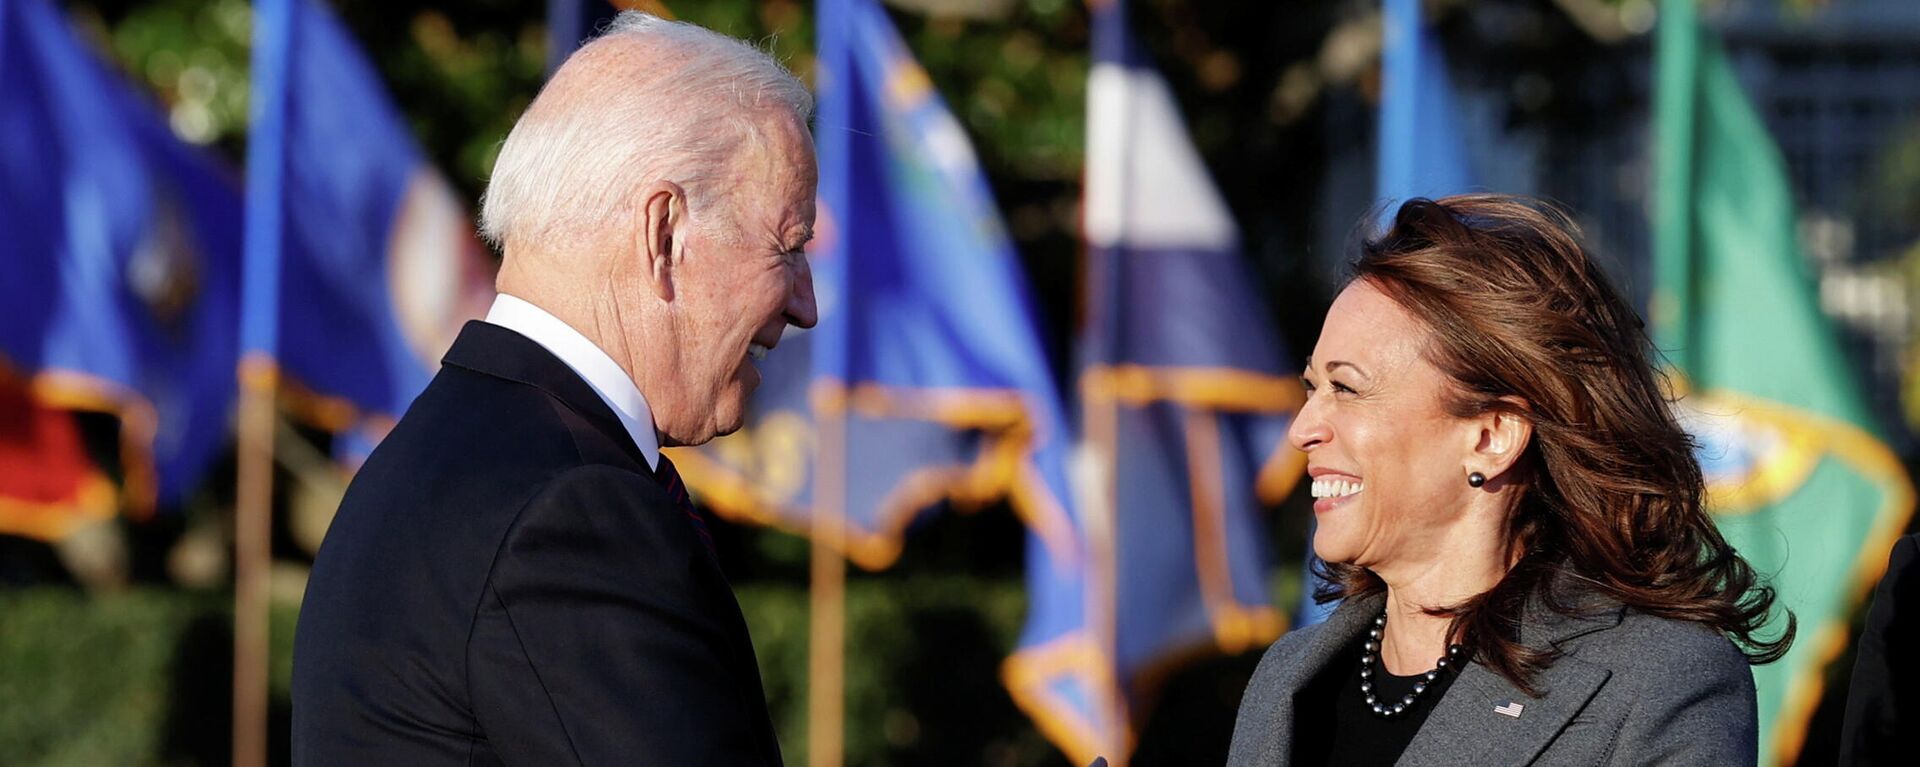 U.S. President Joe Biden and Vice-President Kamala Harris shake hands during a ceremony to sign the Infrastructure Investment and Jobs Act, on the South Lawn at the White House in Washington, U.S., November 15, 2021 - Sputnik International, 1920, 16.11.2021